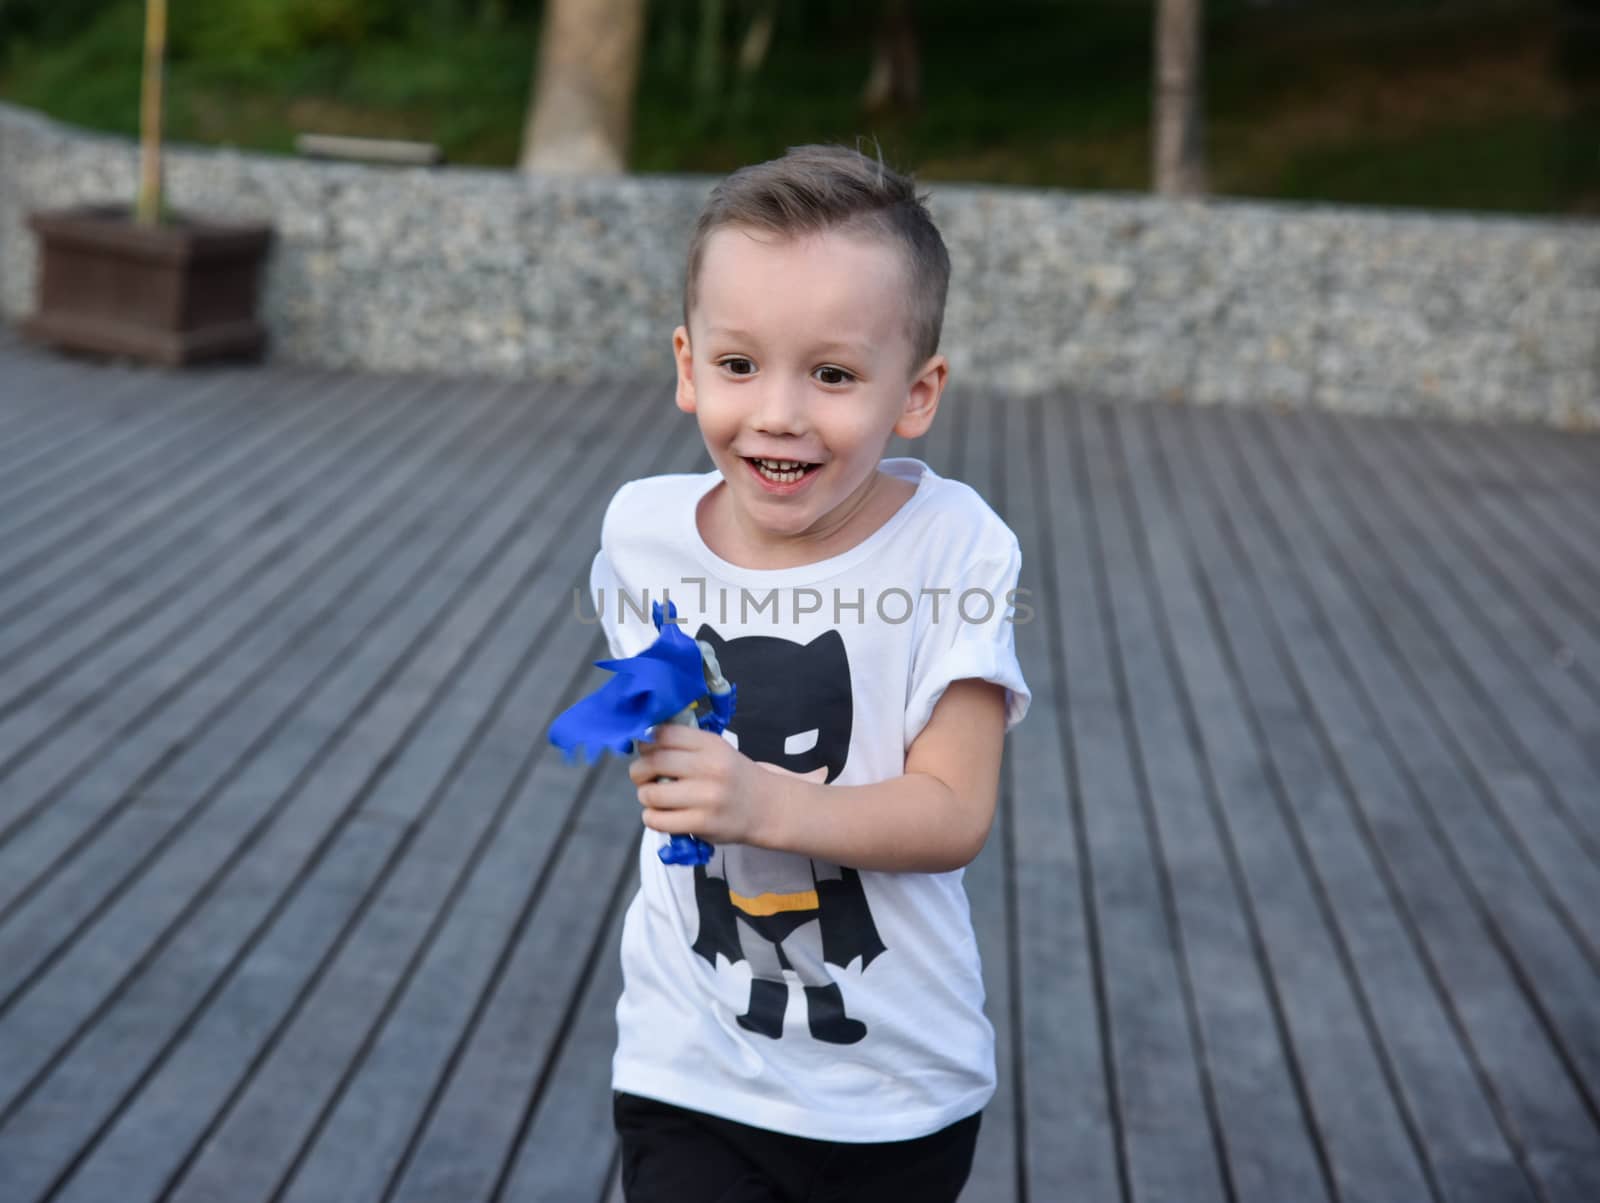 joyful little boy running with a toy in the hands outdoors